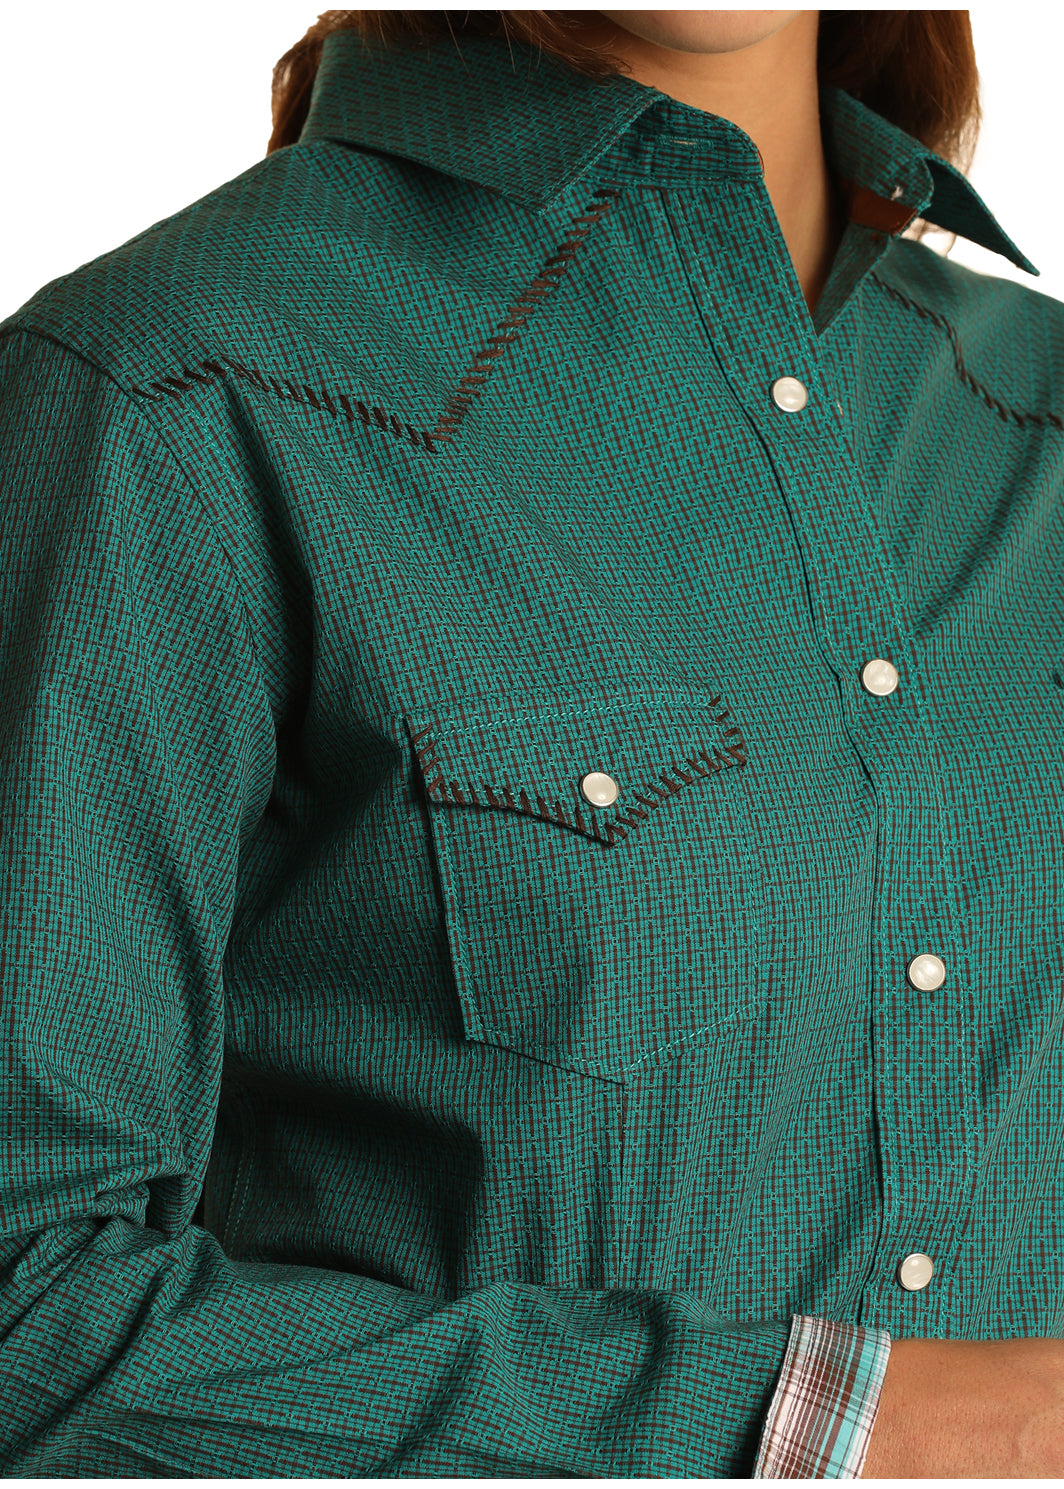 LADIES TEAL PANHANDLE SHIRT W/ STITCHED PIPING